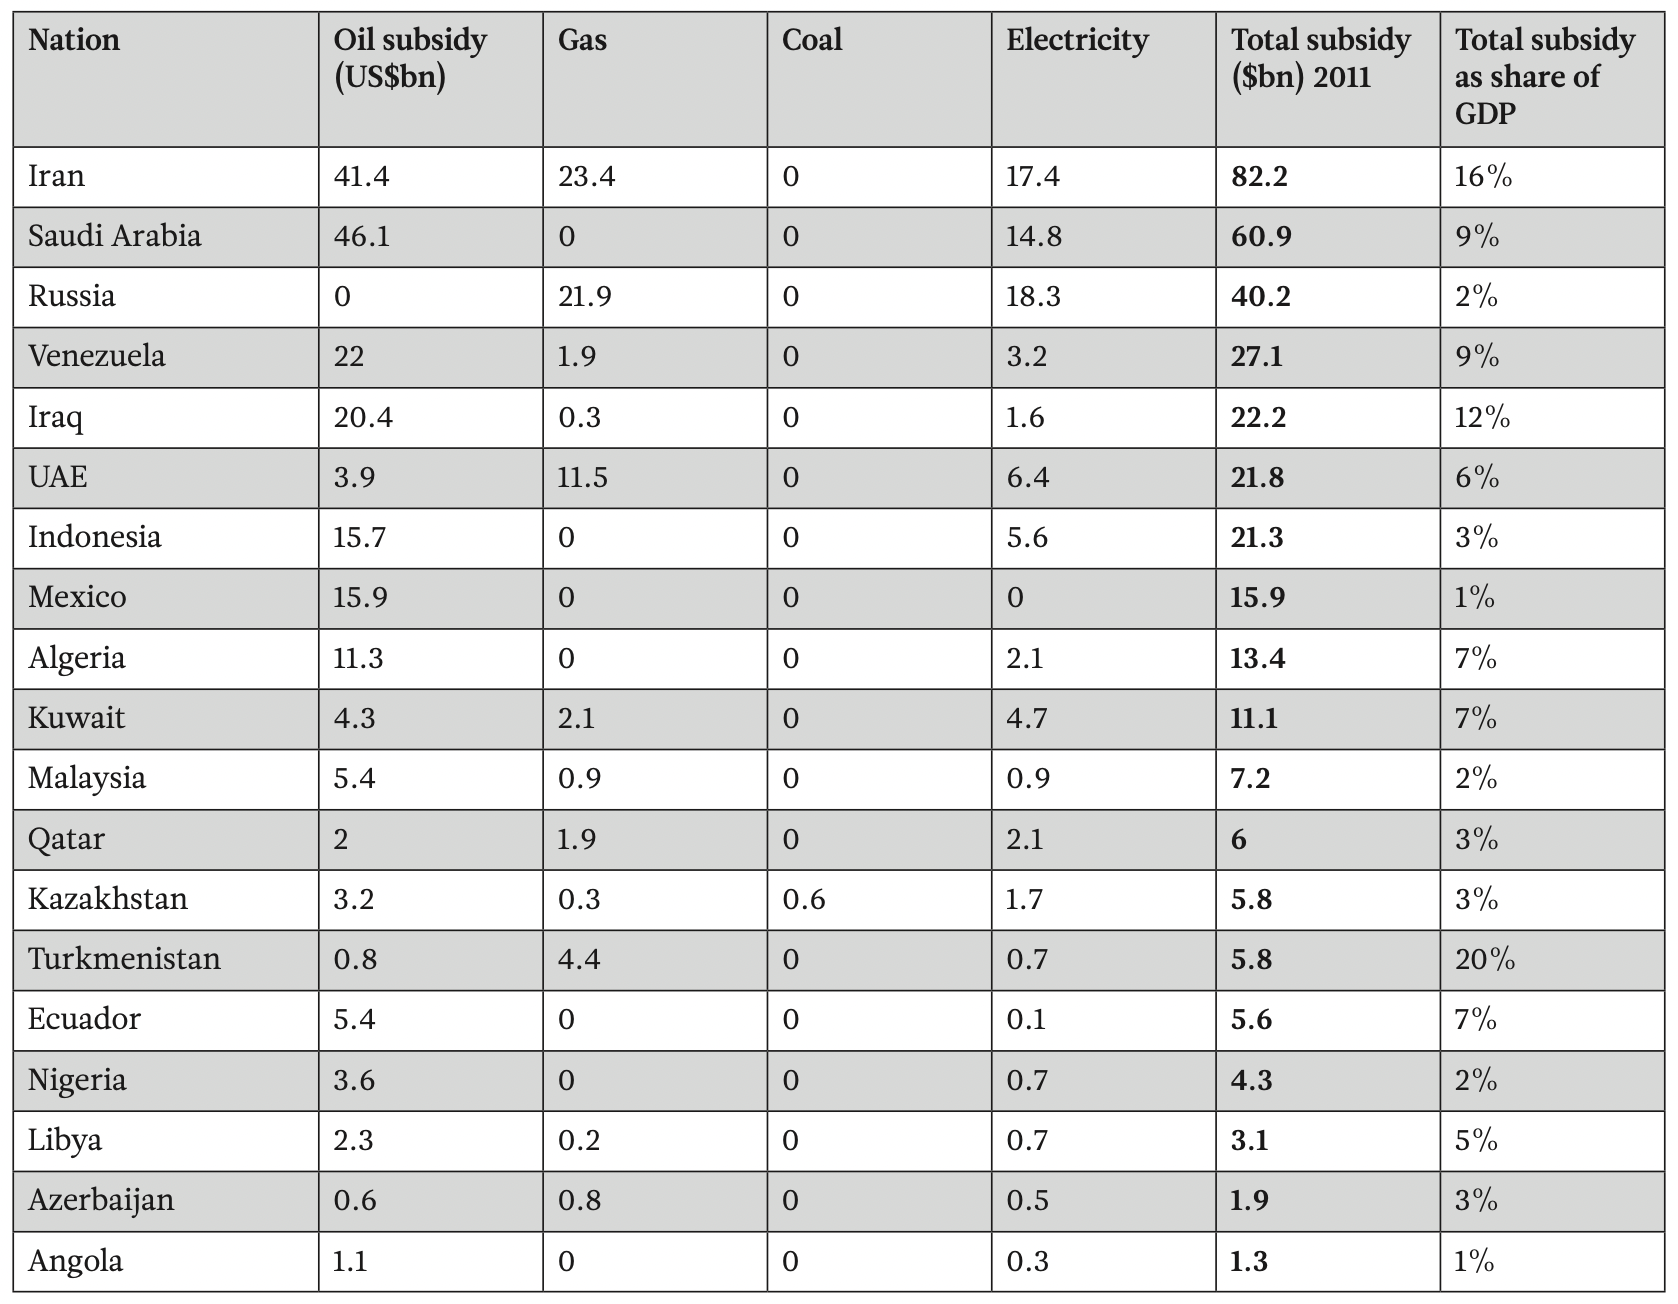 This table compares energy subsidies across major exporting countries.